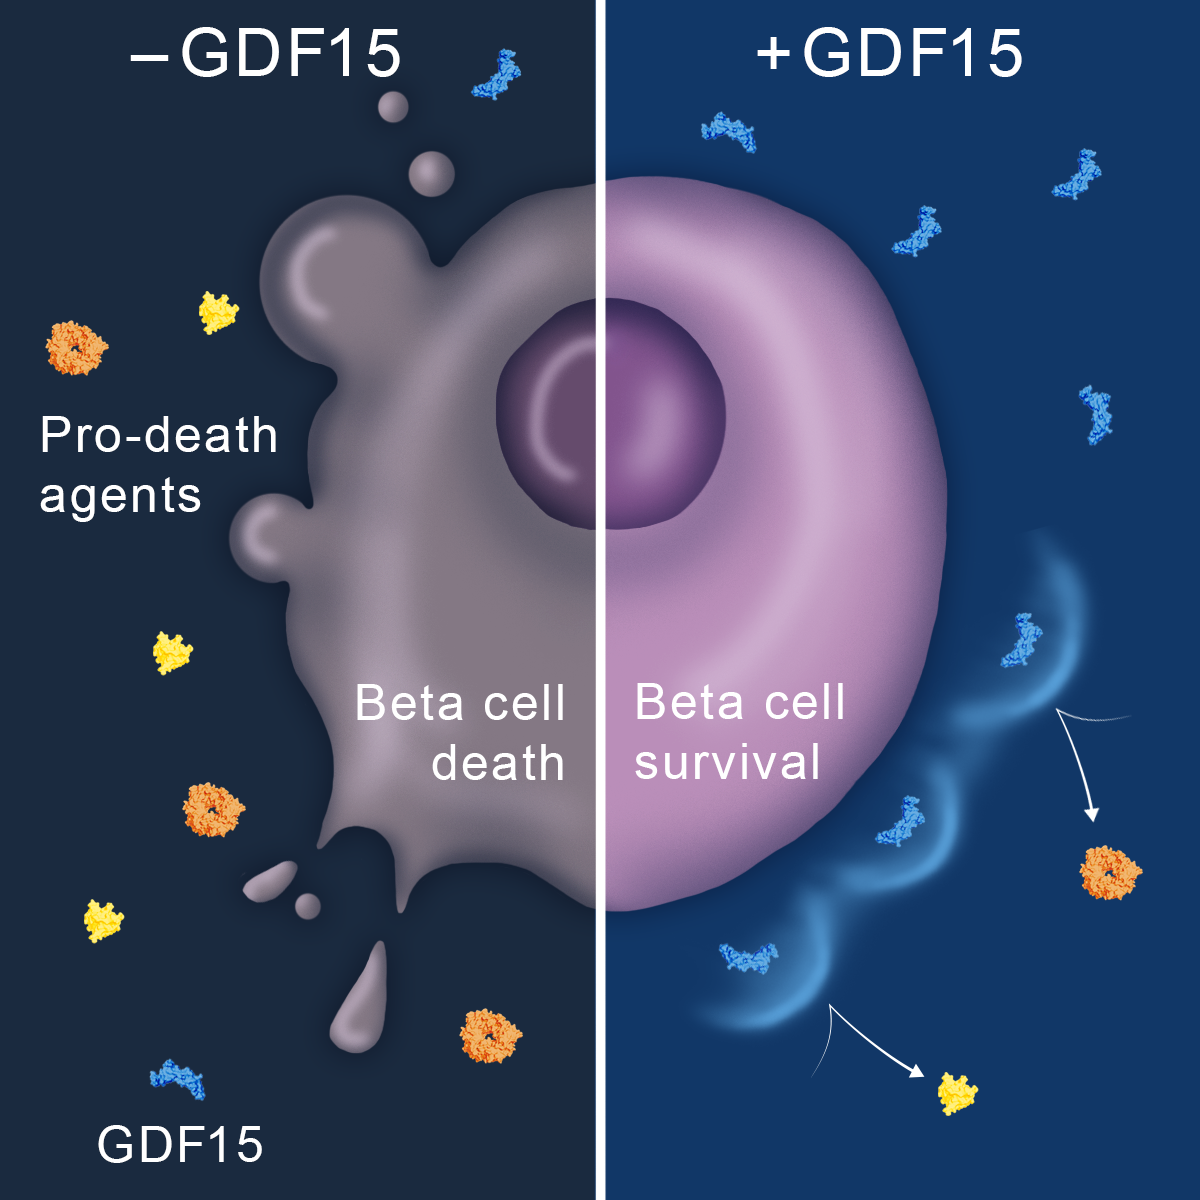 Inflammatory agents deplete growth differentiation factor 15 (GDF15) and kill susceptible beta cells to cause type 1 diabetes. Adding back GDF15 protects beta cells in treated mice.